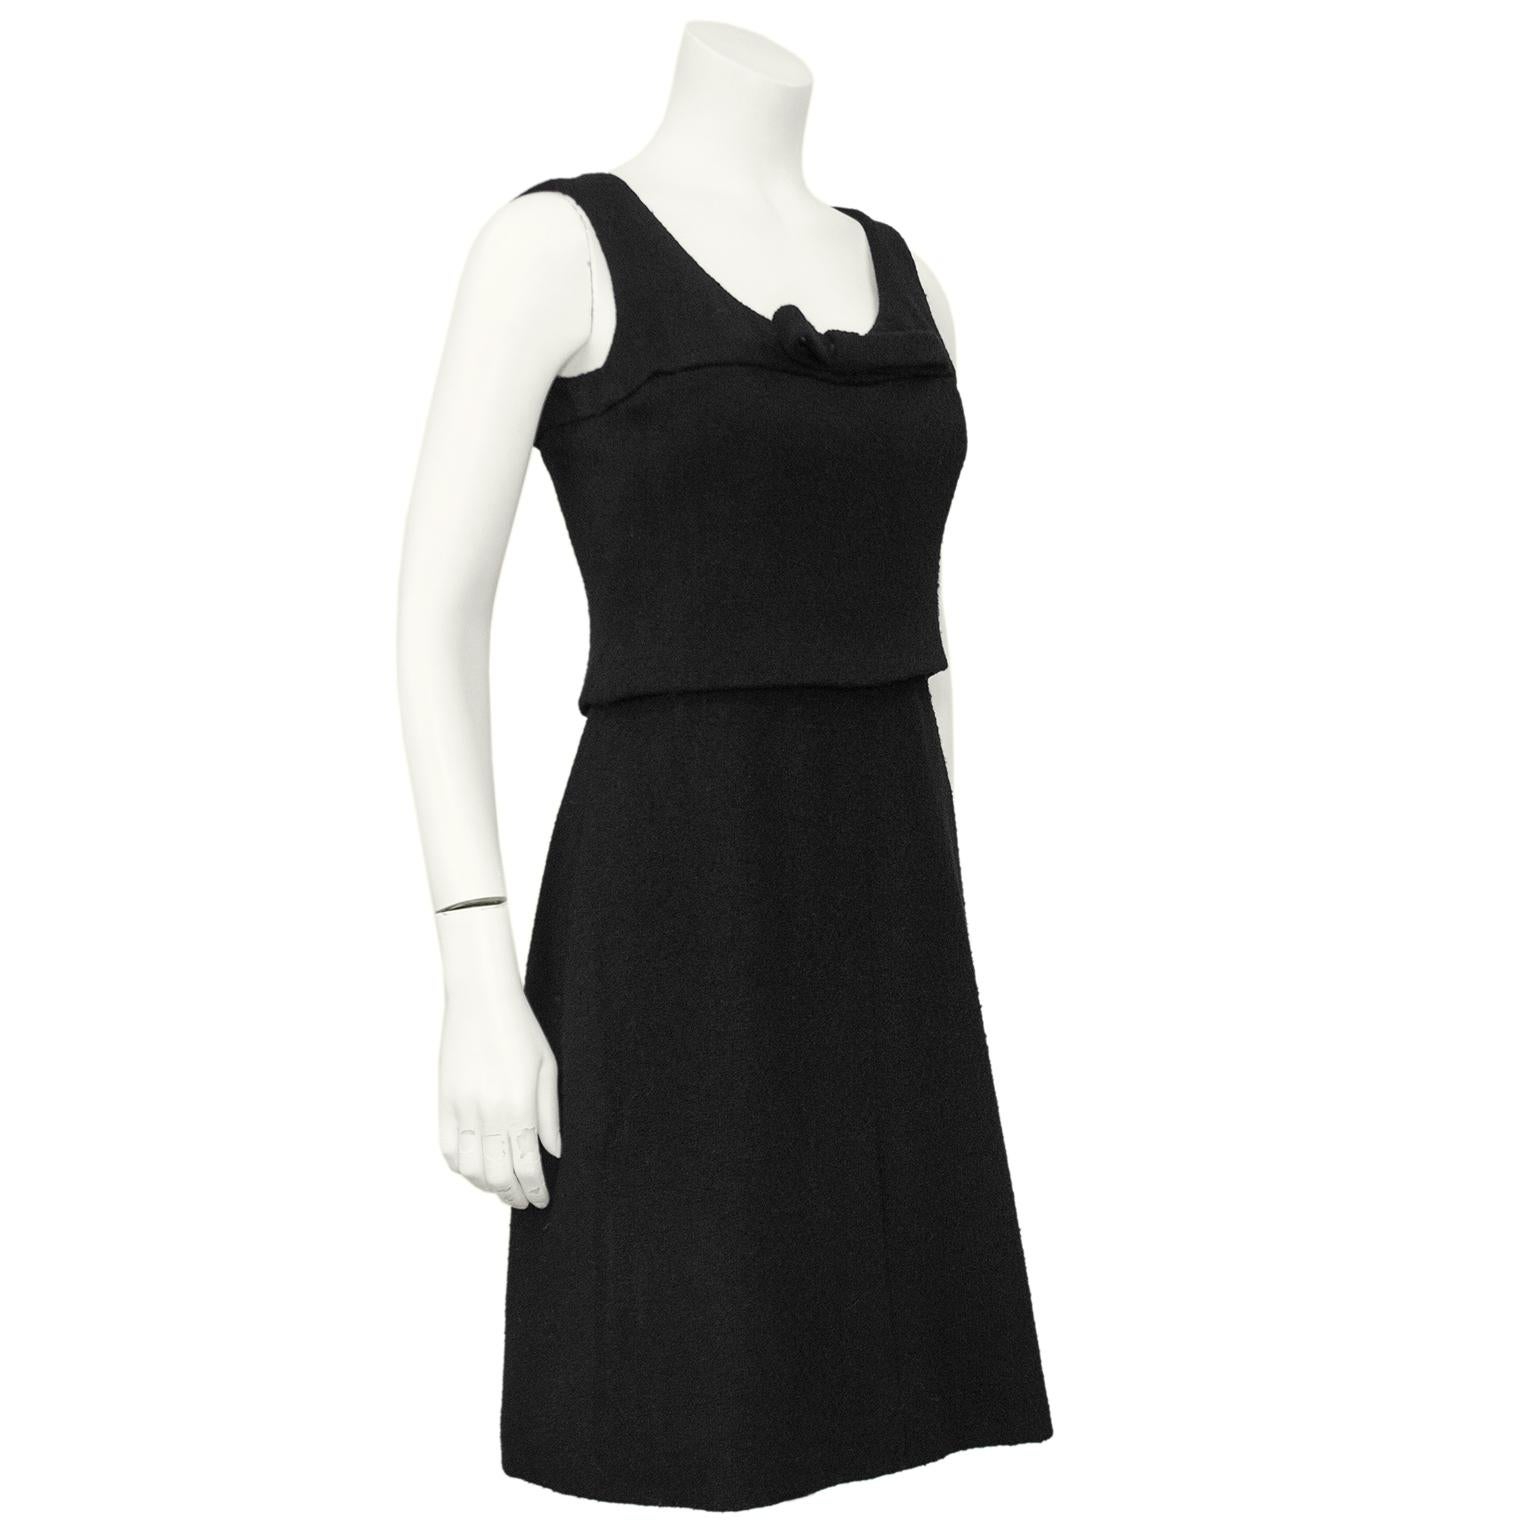 The most darling little black wool dress from the Autumn-Winter 1961 Christian Dior Haute Couture Collection by Marc Bohan. Sleeveless with a scoop neck with a large flat bow in the centre. The dress is constructed to look like a short top and a